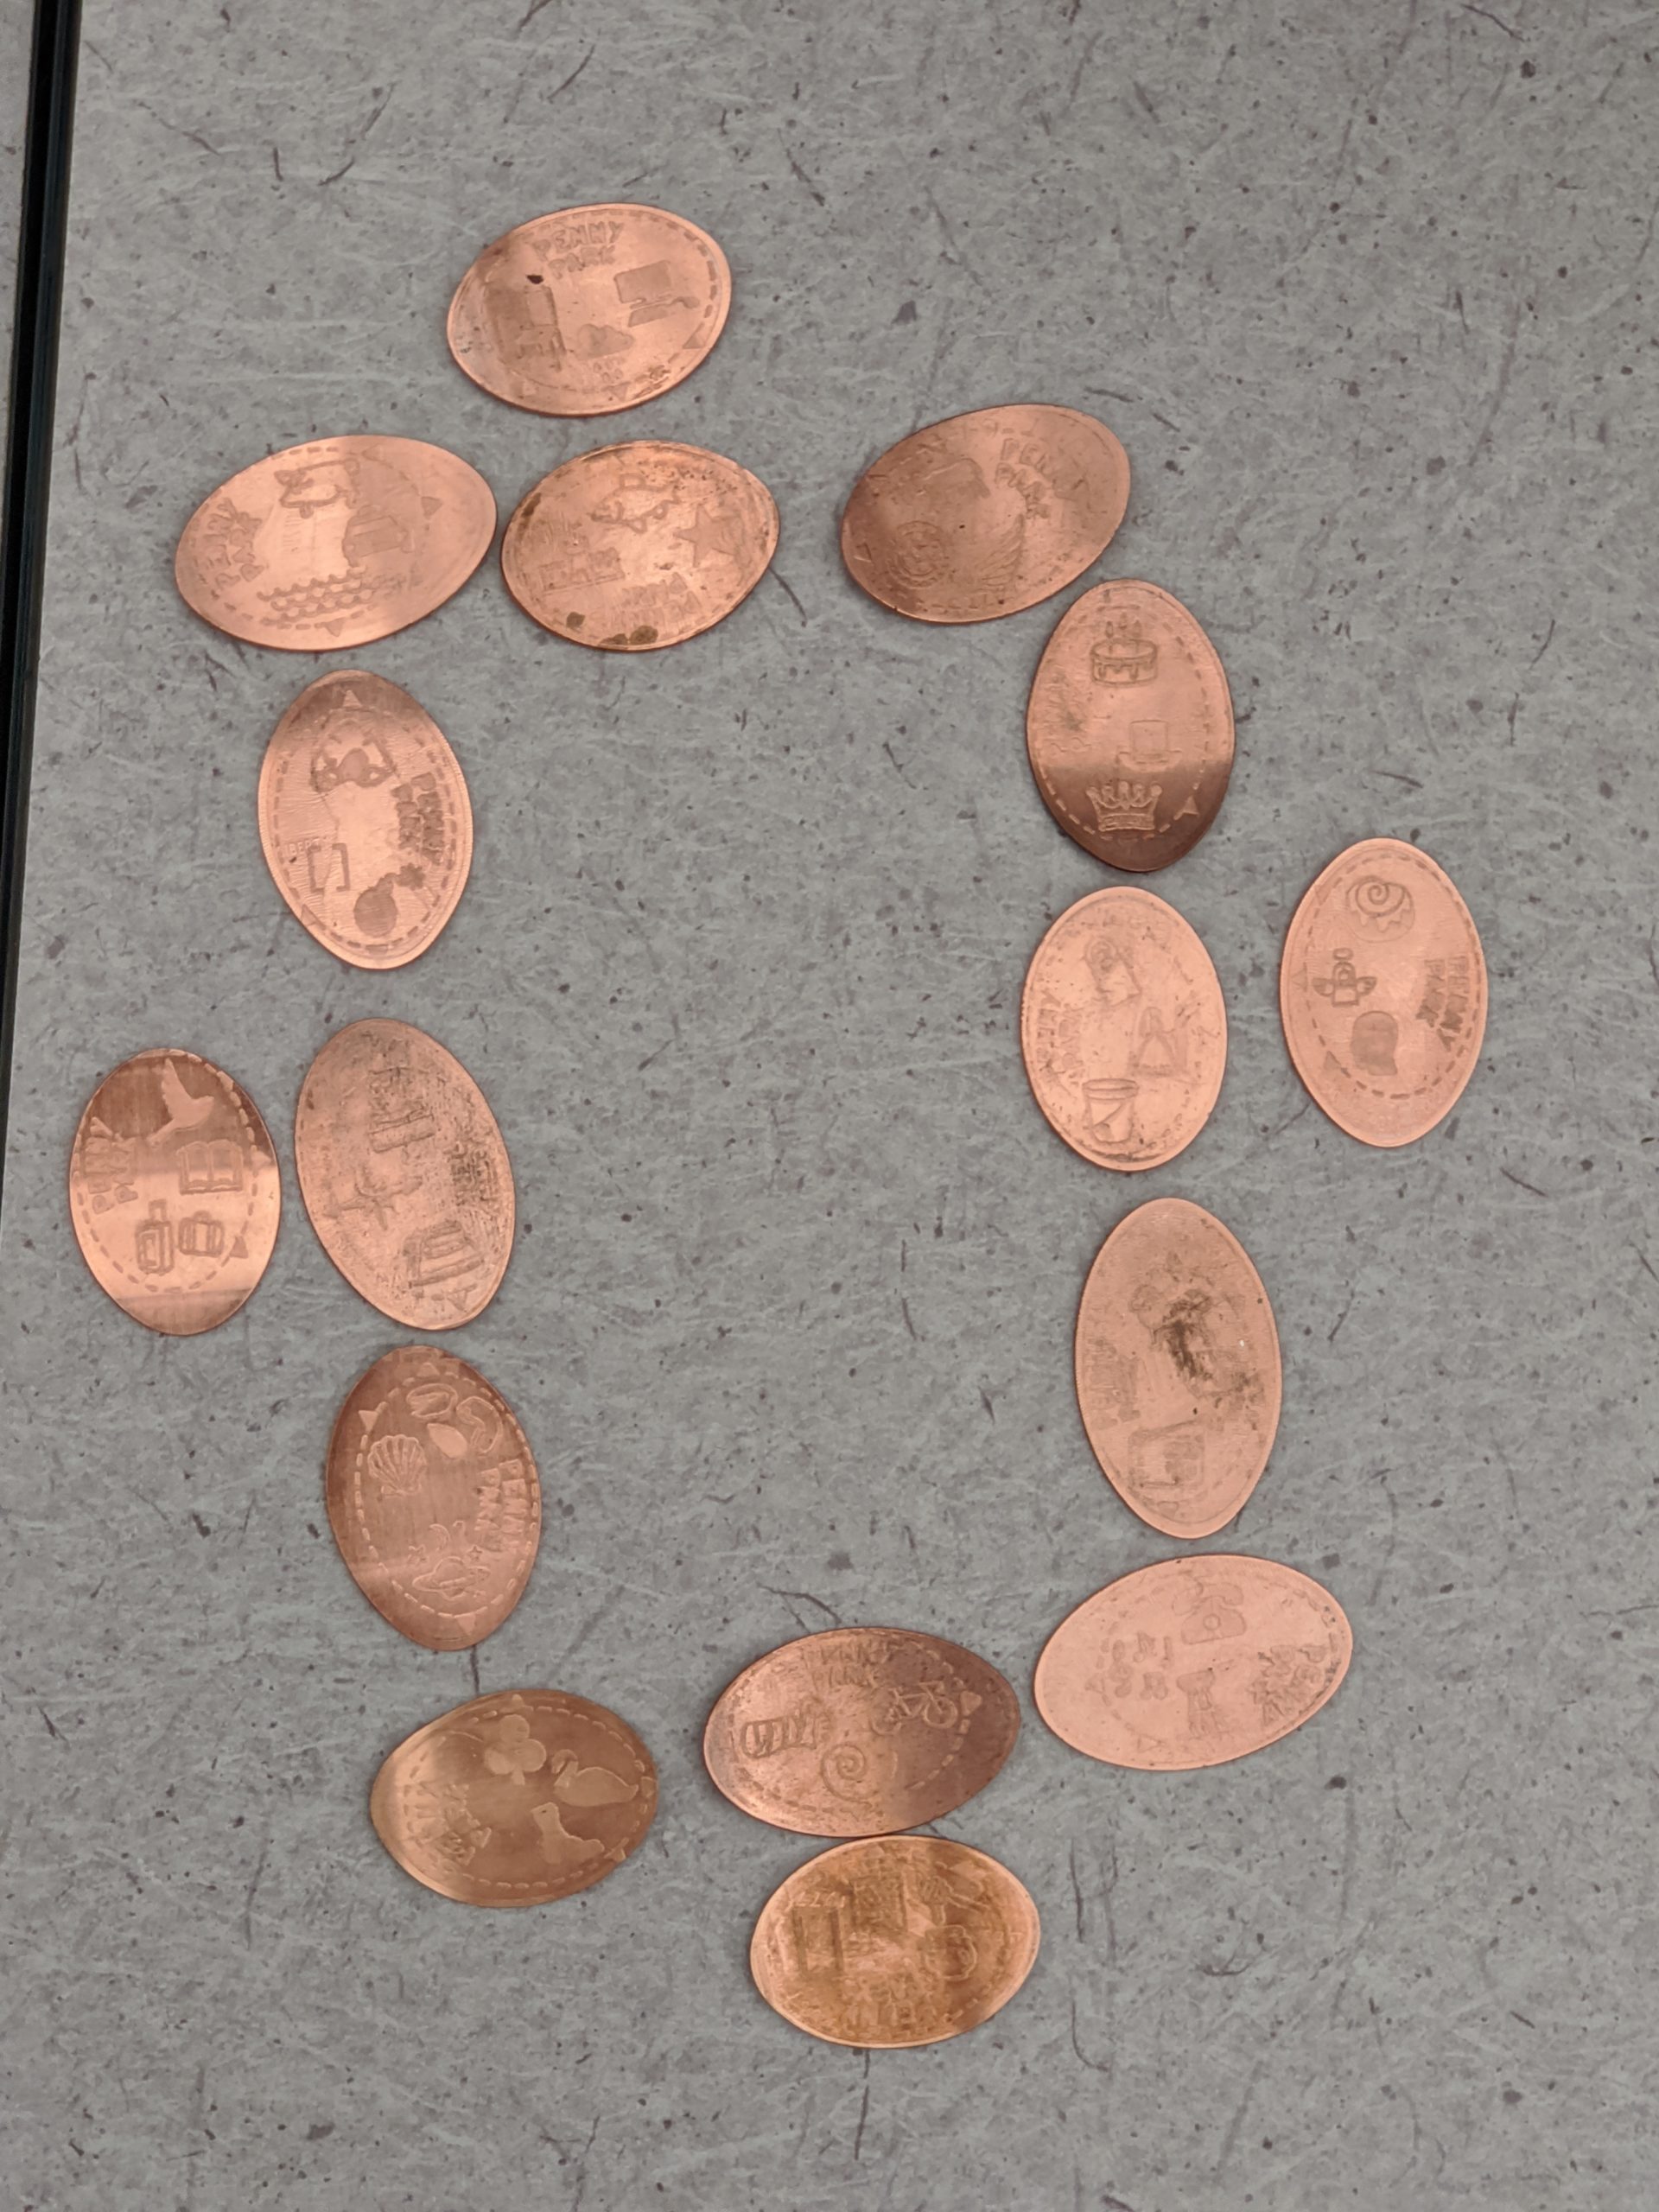 the sixteen pressed pennies laid out in a nice arrangement